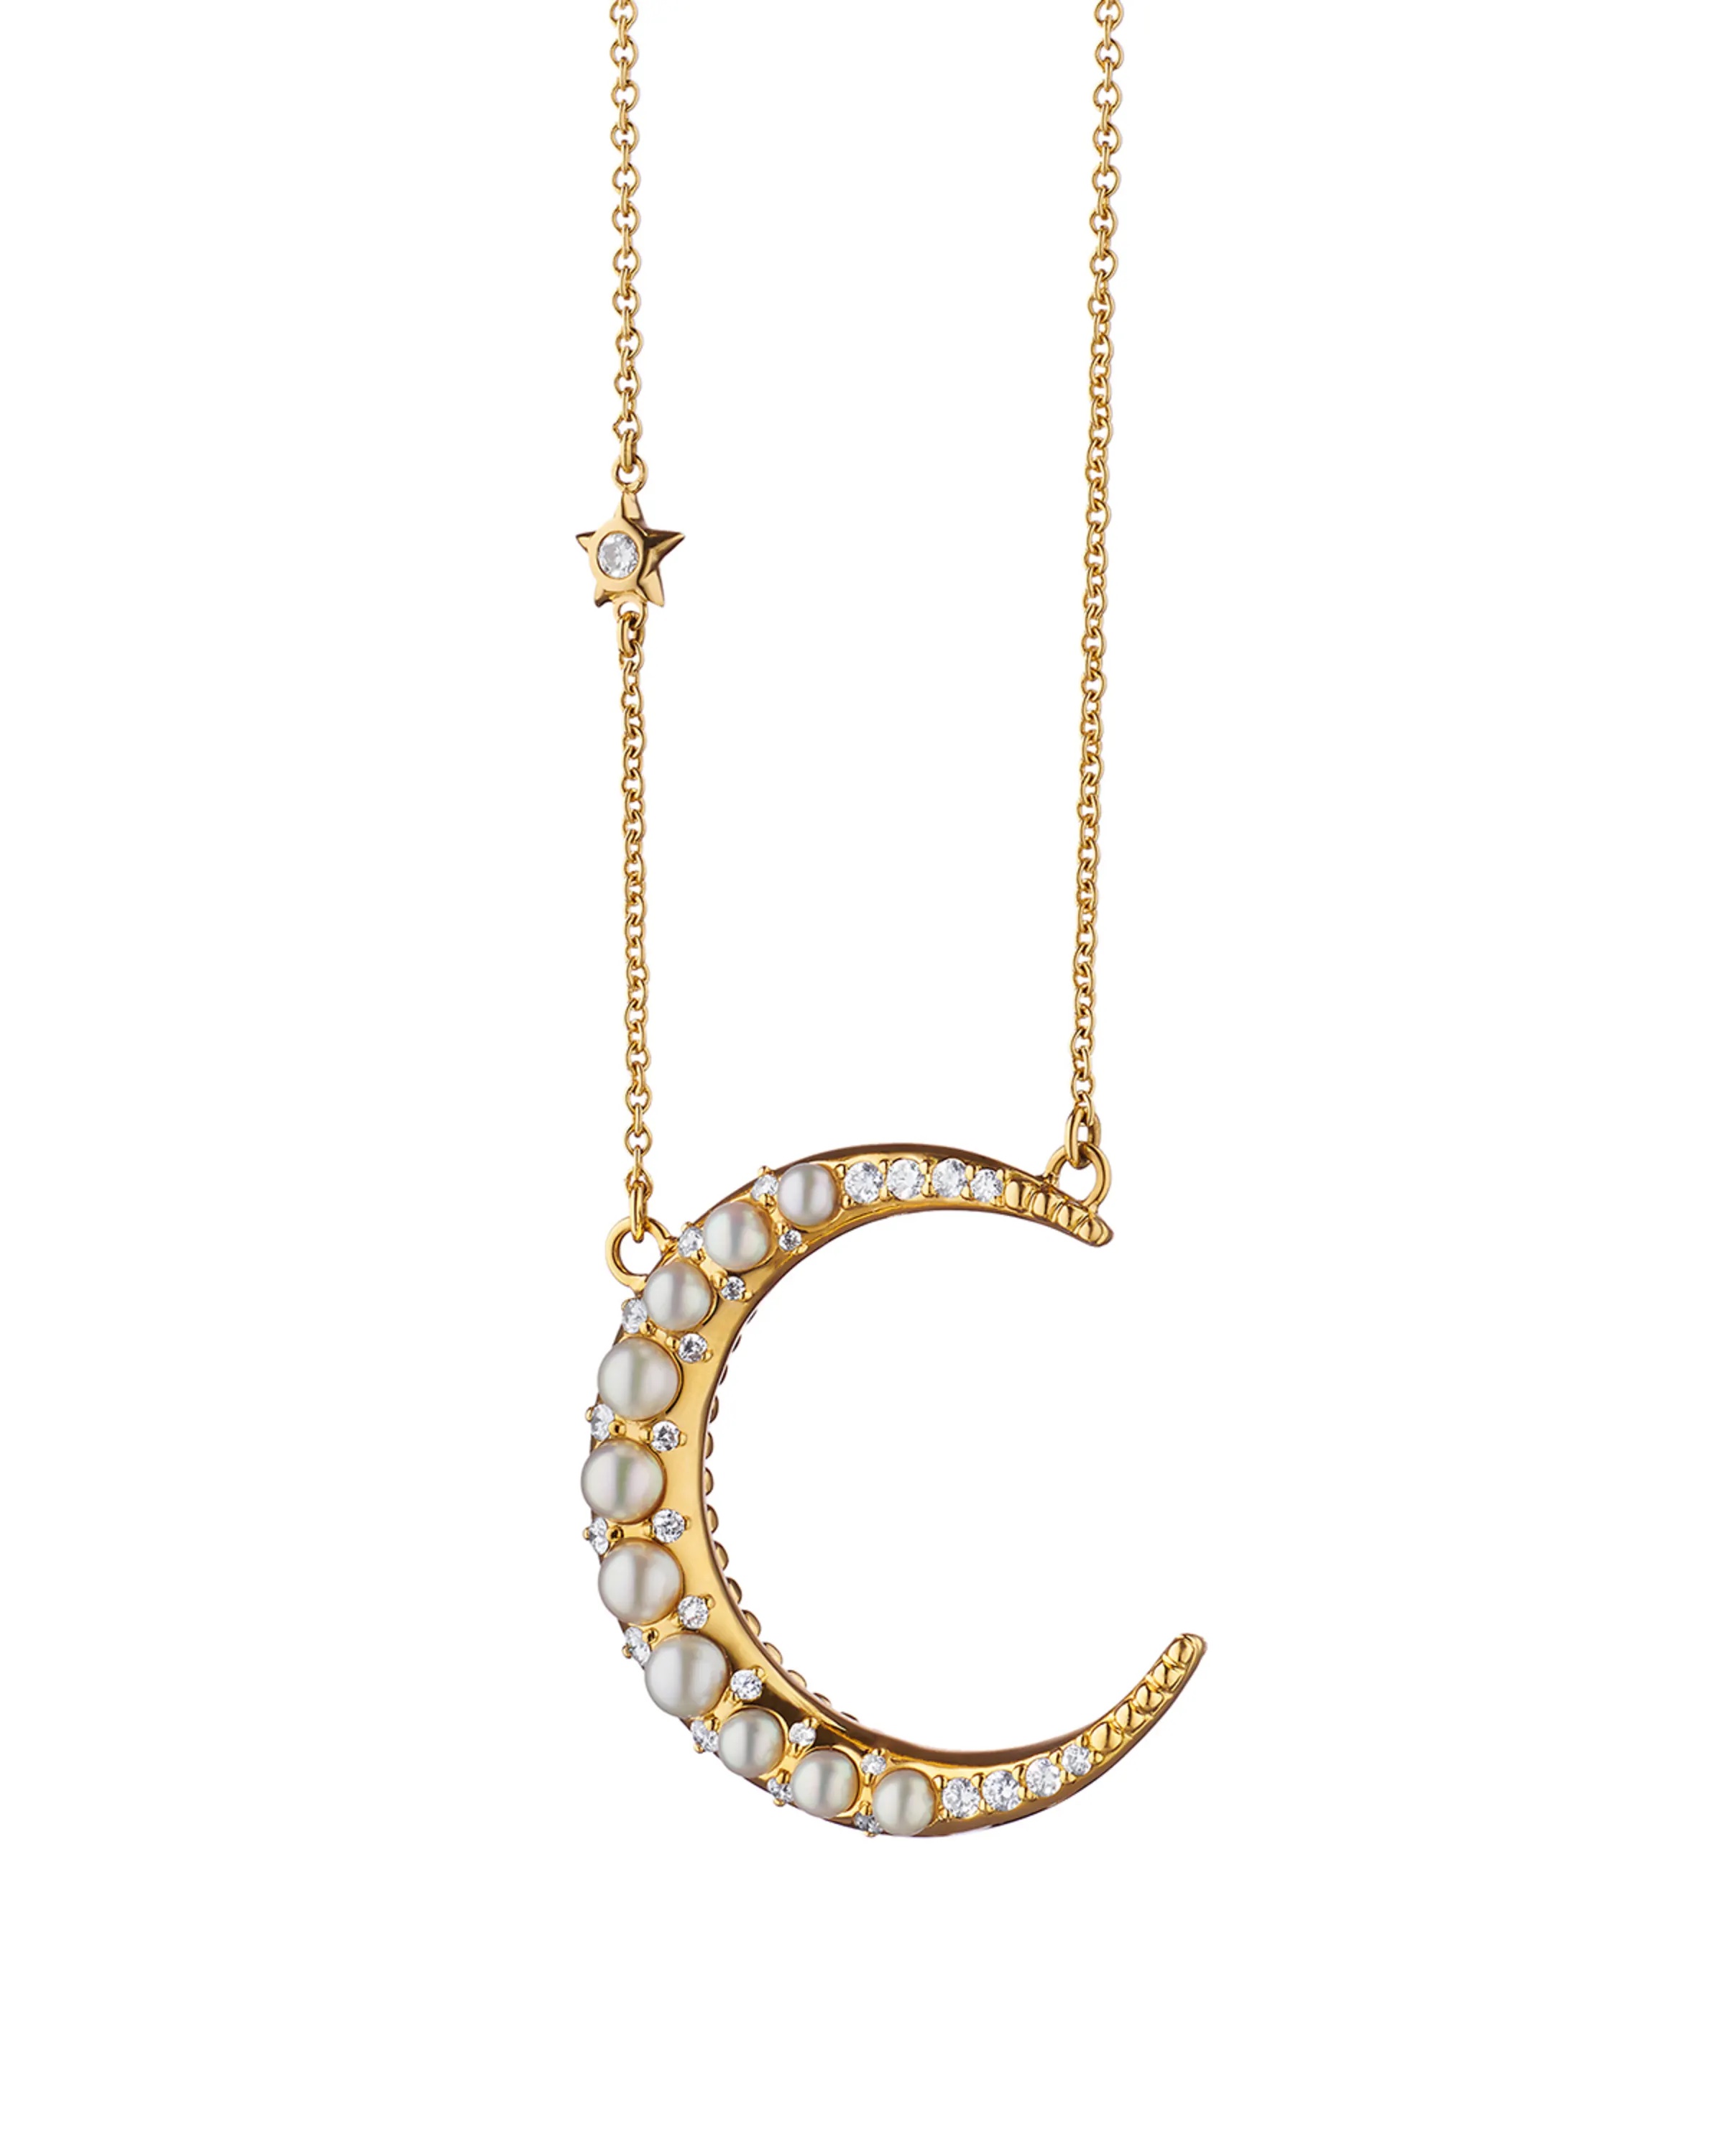 Monica Rich Kosann 18K Yellow Gold Large Pearl Crescent Moon Necklace with Diamonds